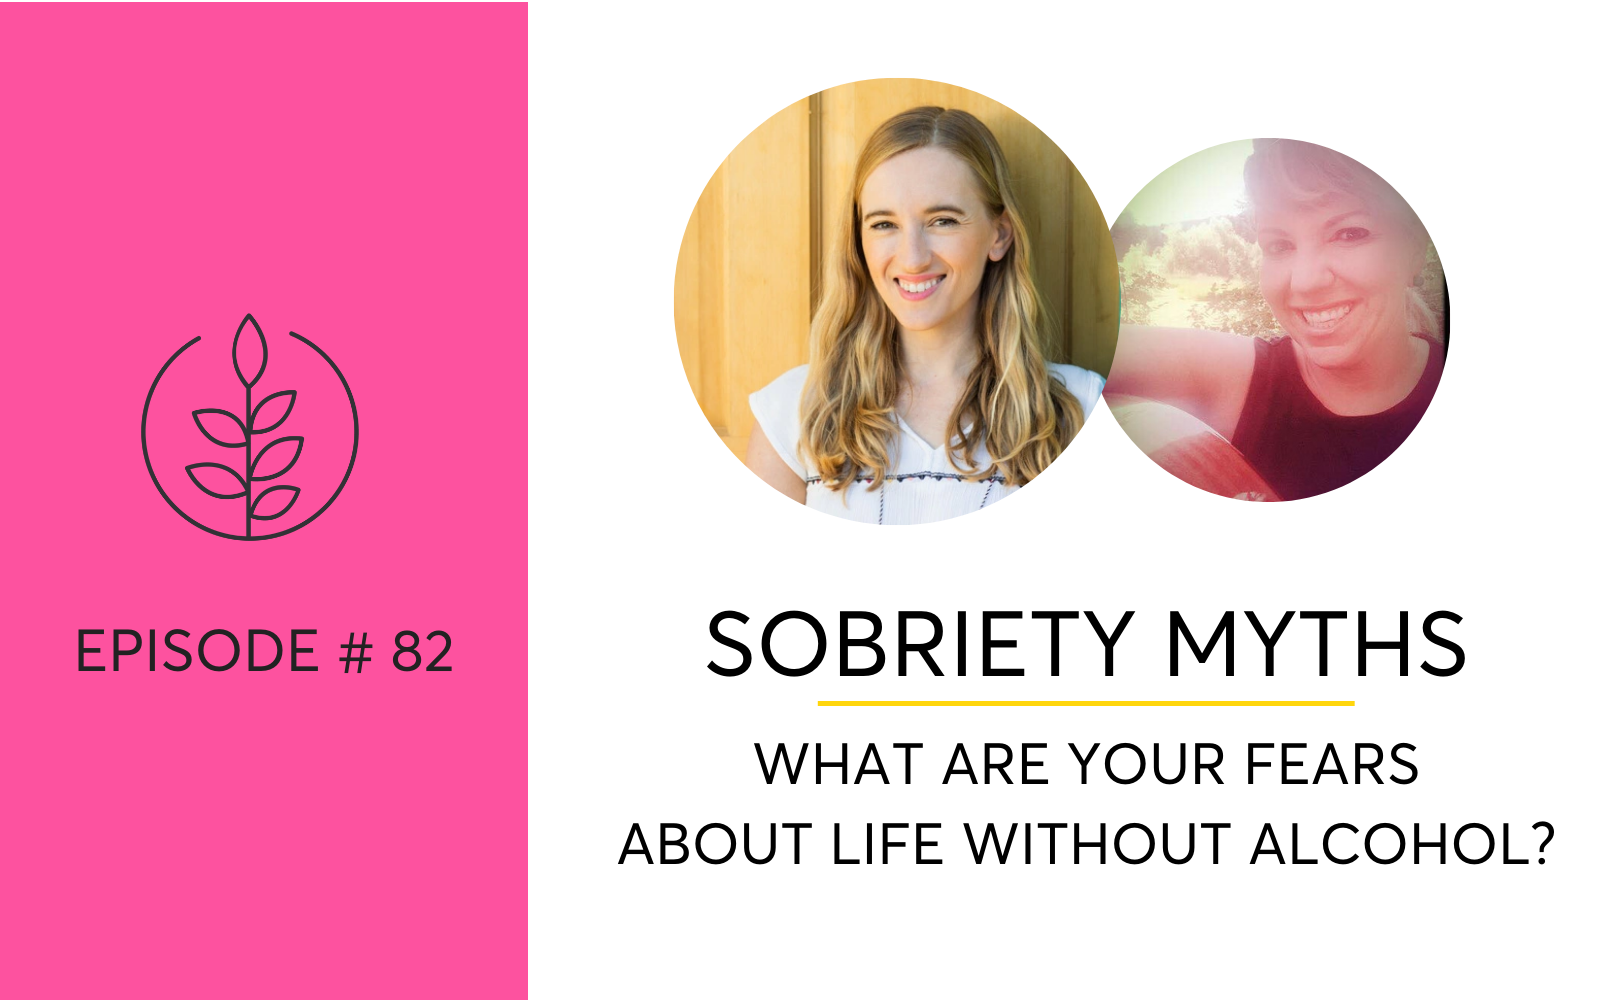 Sobriety Myths: What Are Your Fears About Life Without Alcohol?